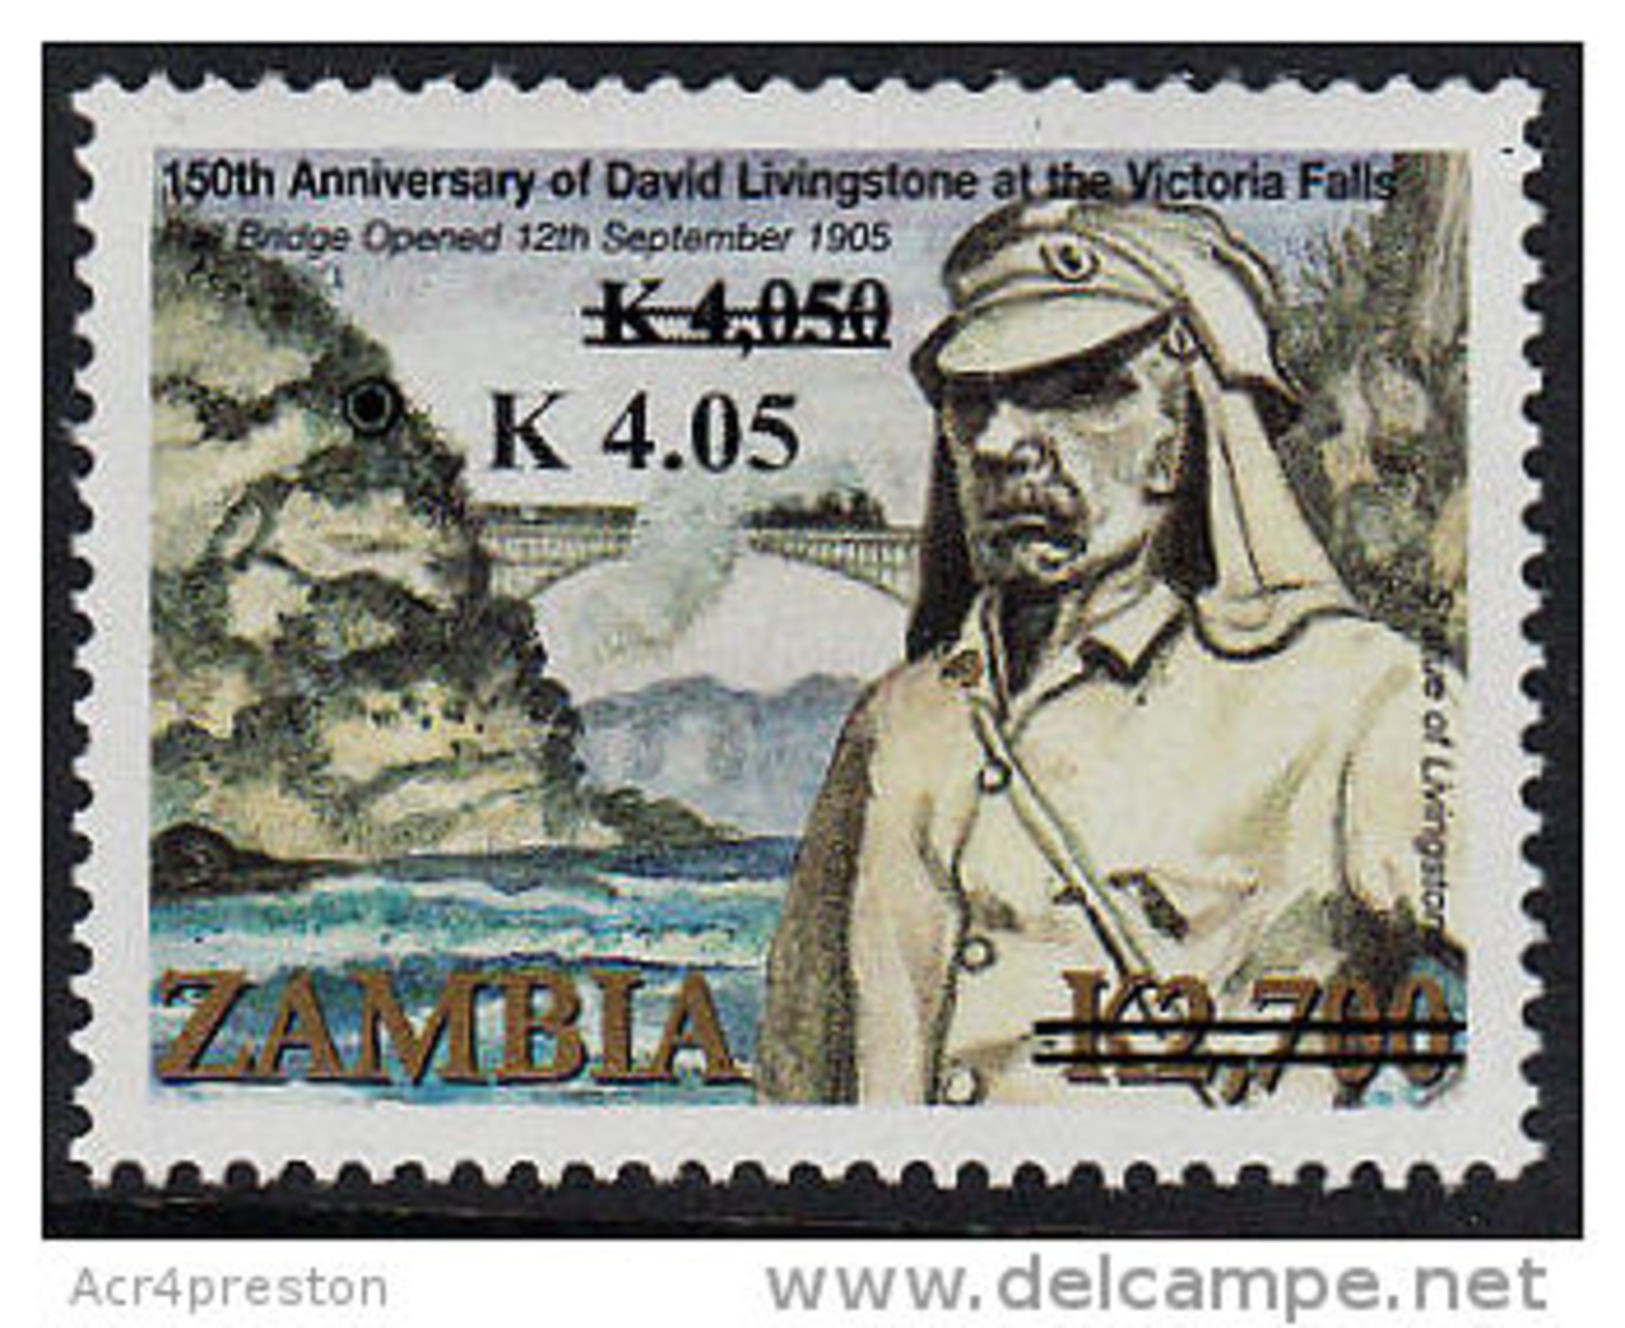 Zm1099 ZAMBIA 2013, SG1099 New Currency K4.05 Surcharge On K4,050 On K2,700 Livingstone  MNH - Zambia (1965-...)